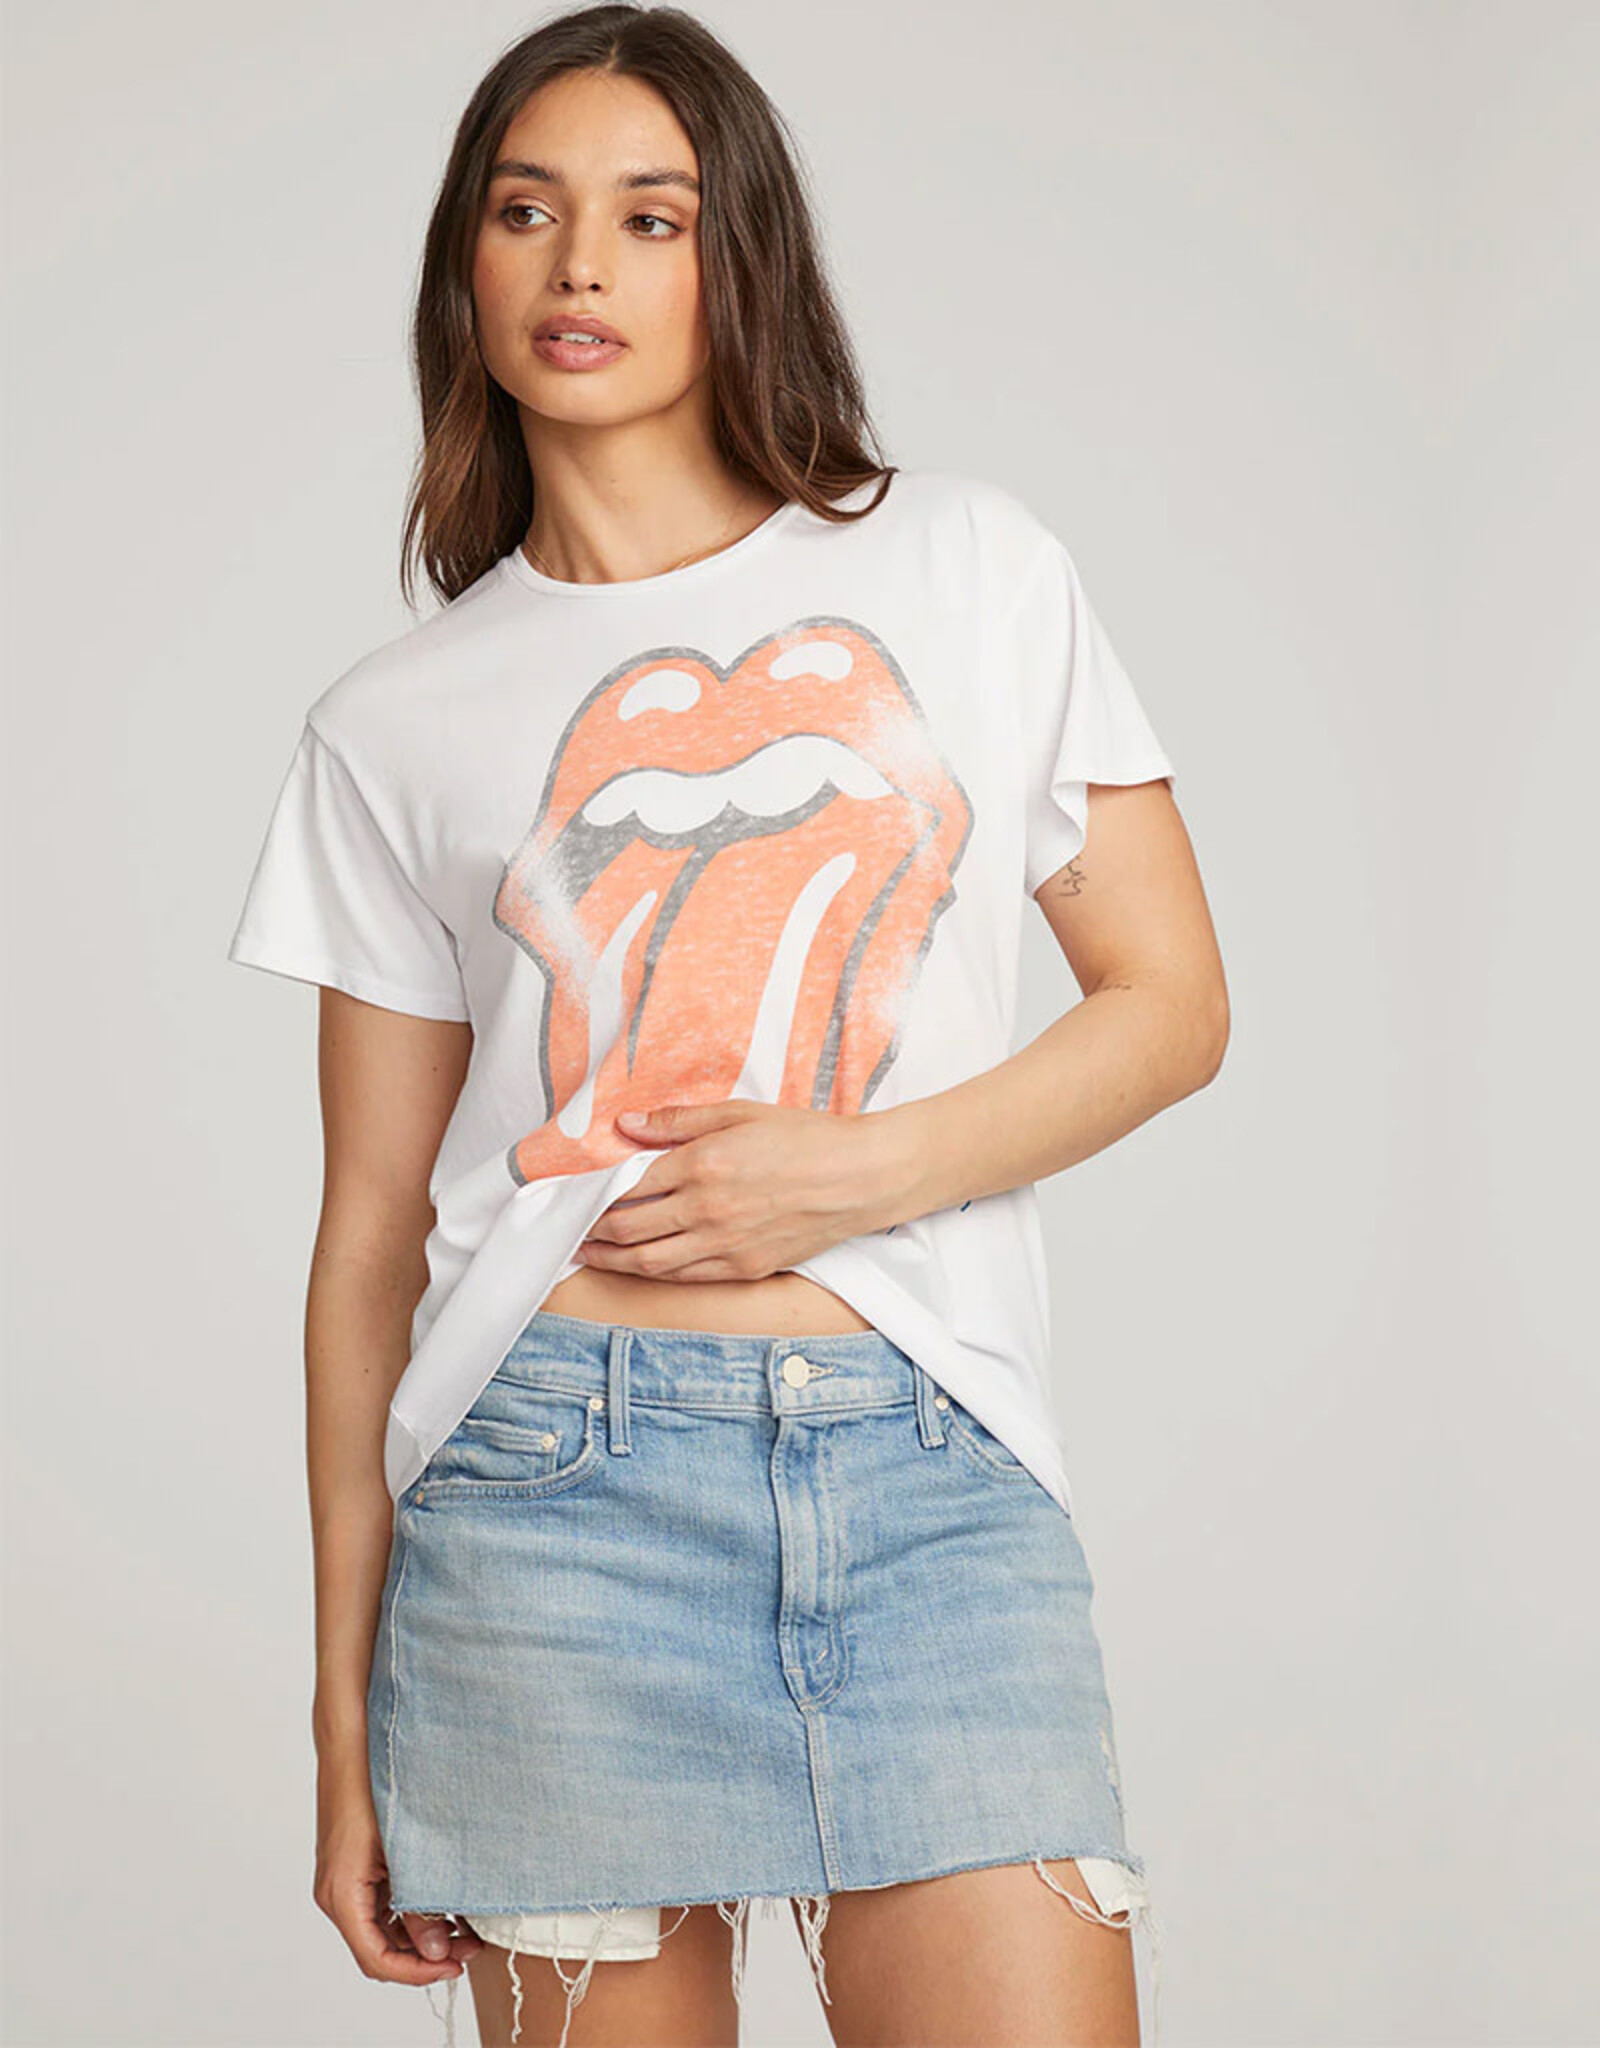 CHASER ROLLING STONES CLASSIC LOGO TEE